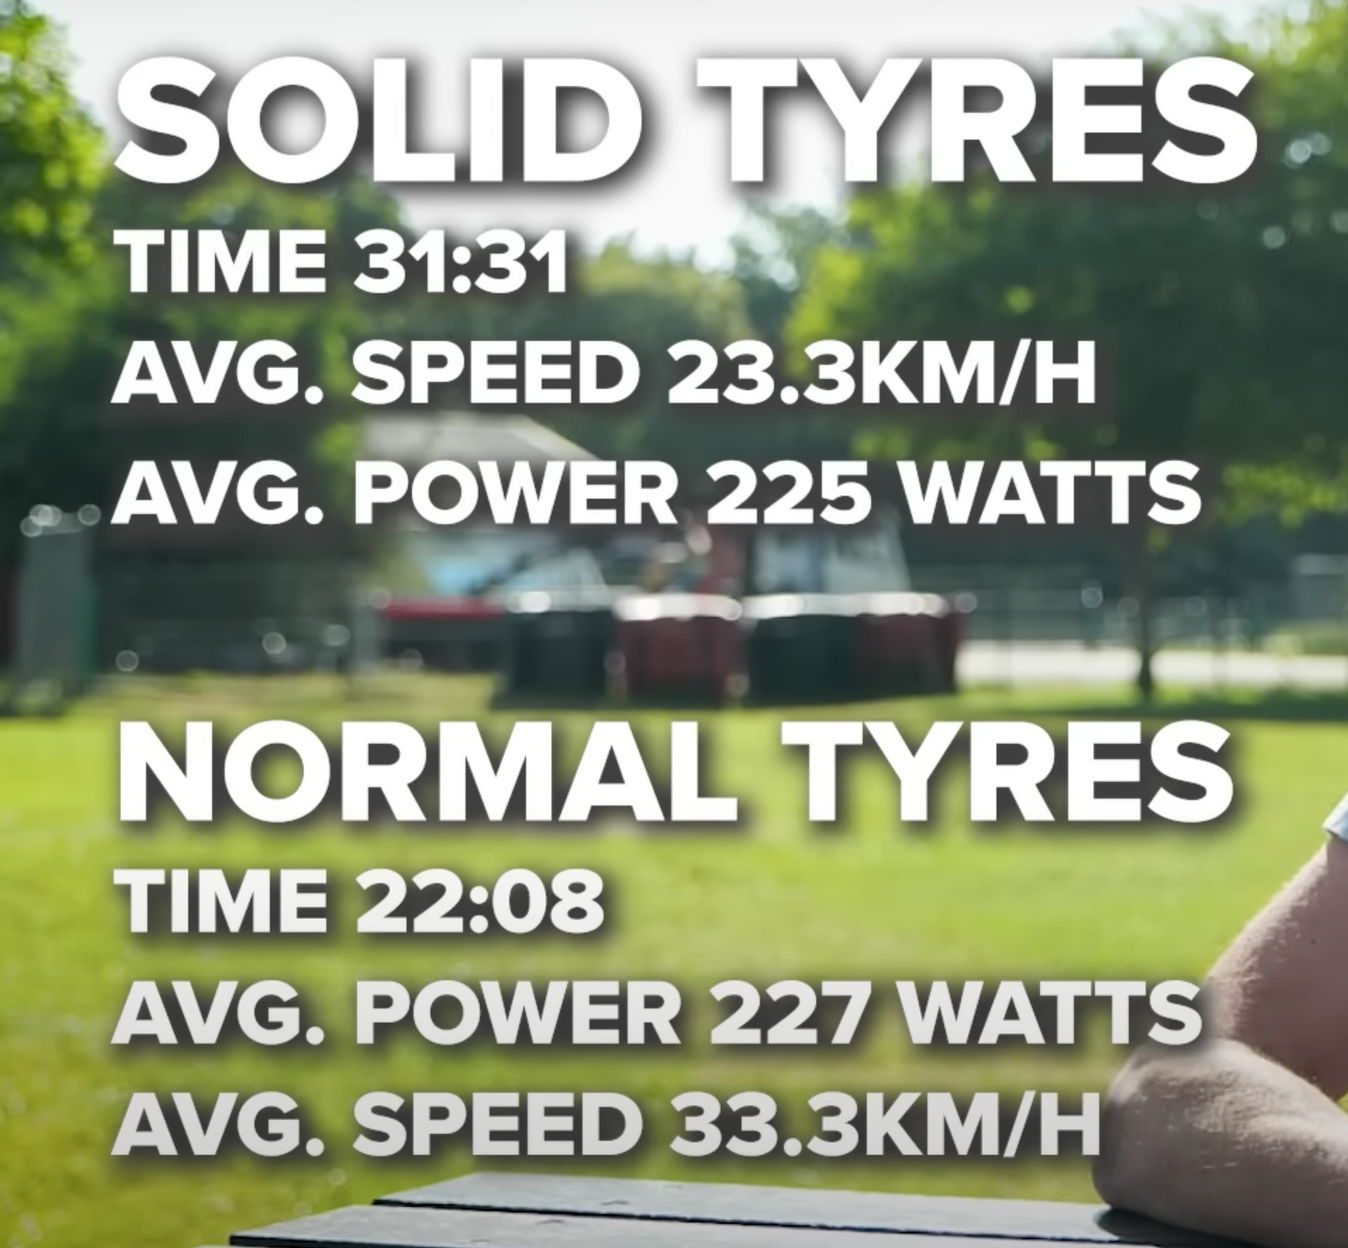 The premium tyre was significantly faster.